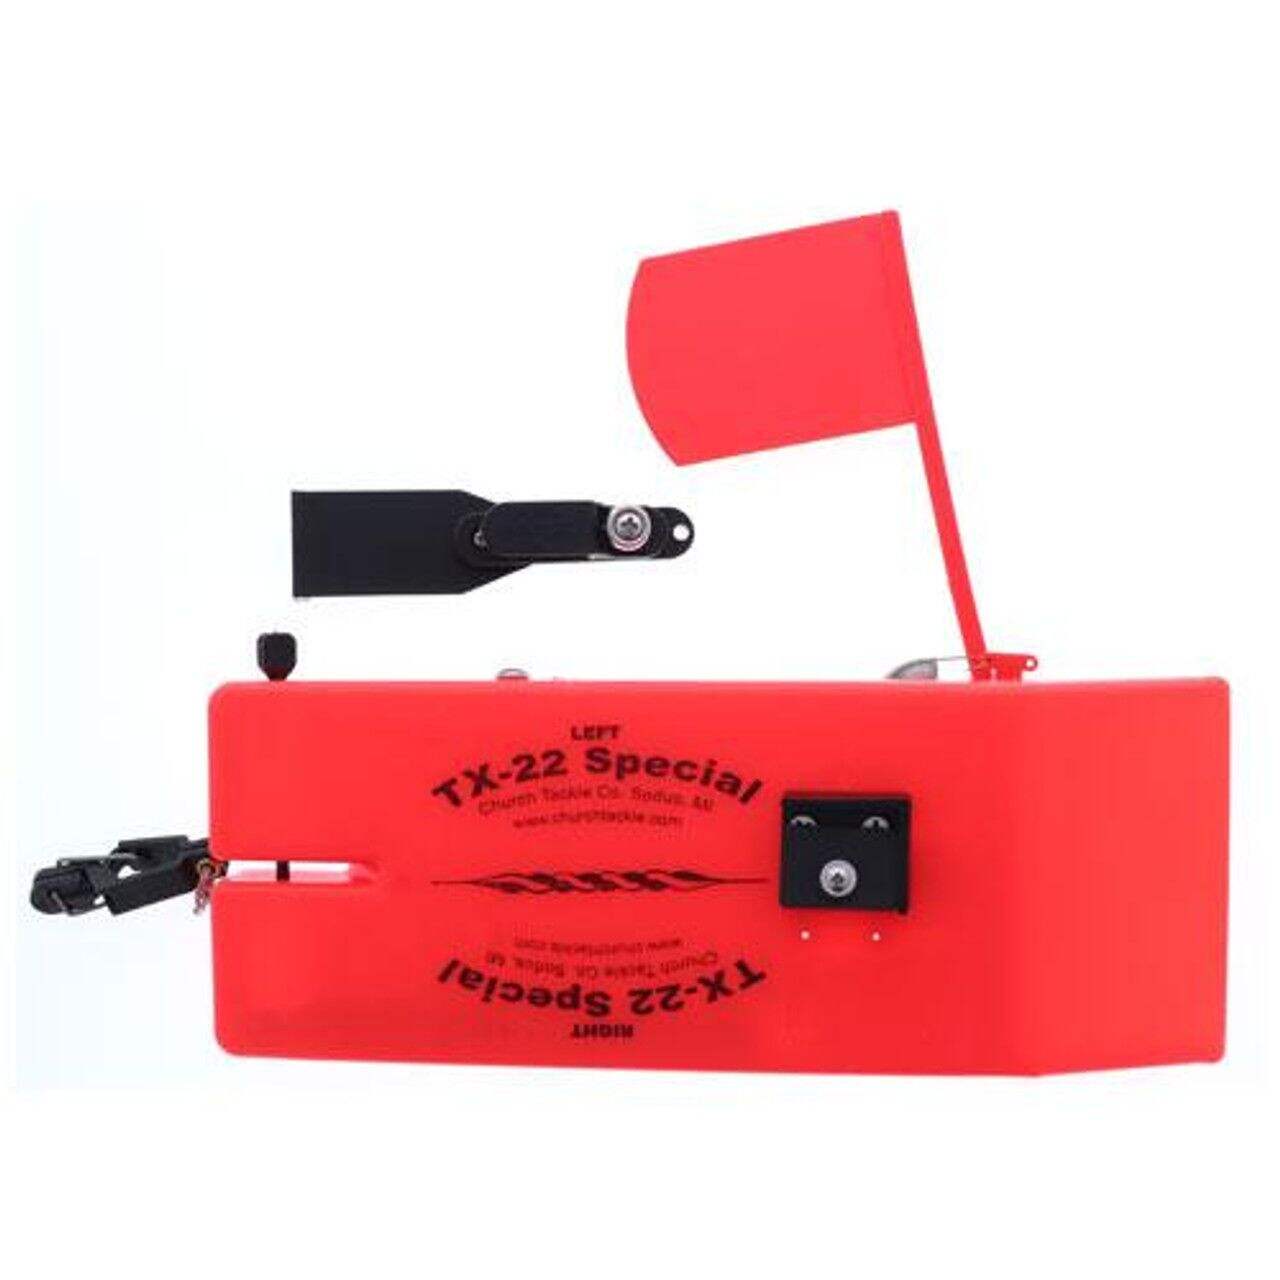 https://media-www.canadiantire.ca/product/playing/fishing/fishing-lures/1786195/church-tx-a-22-special-planer-board-30350-05d56669-ff94-4e1a-b48e-aec4d5425f13-jpgrendition.jpg?imdensity=1&imwidth=640&impolicy=mZoom